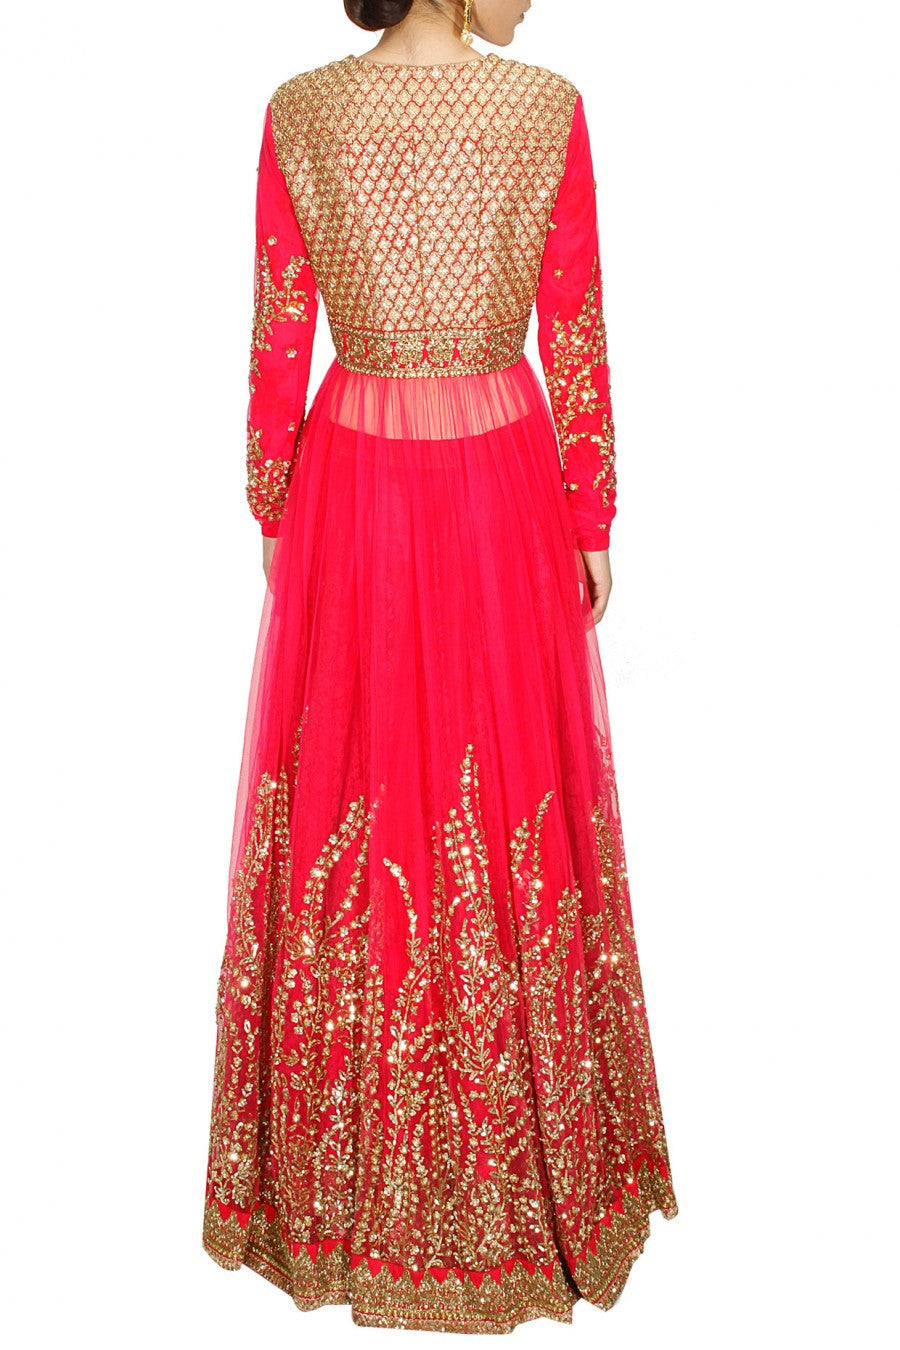 Aza - Discover iconic ready-to-ship styles by Sabyasachi... | Facebook